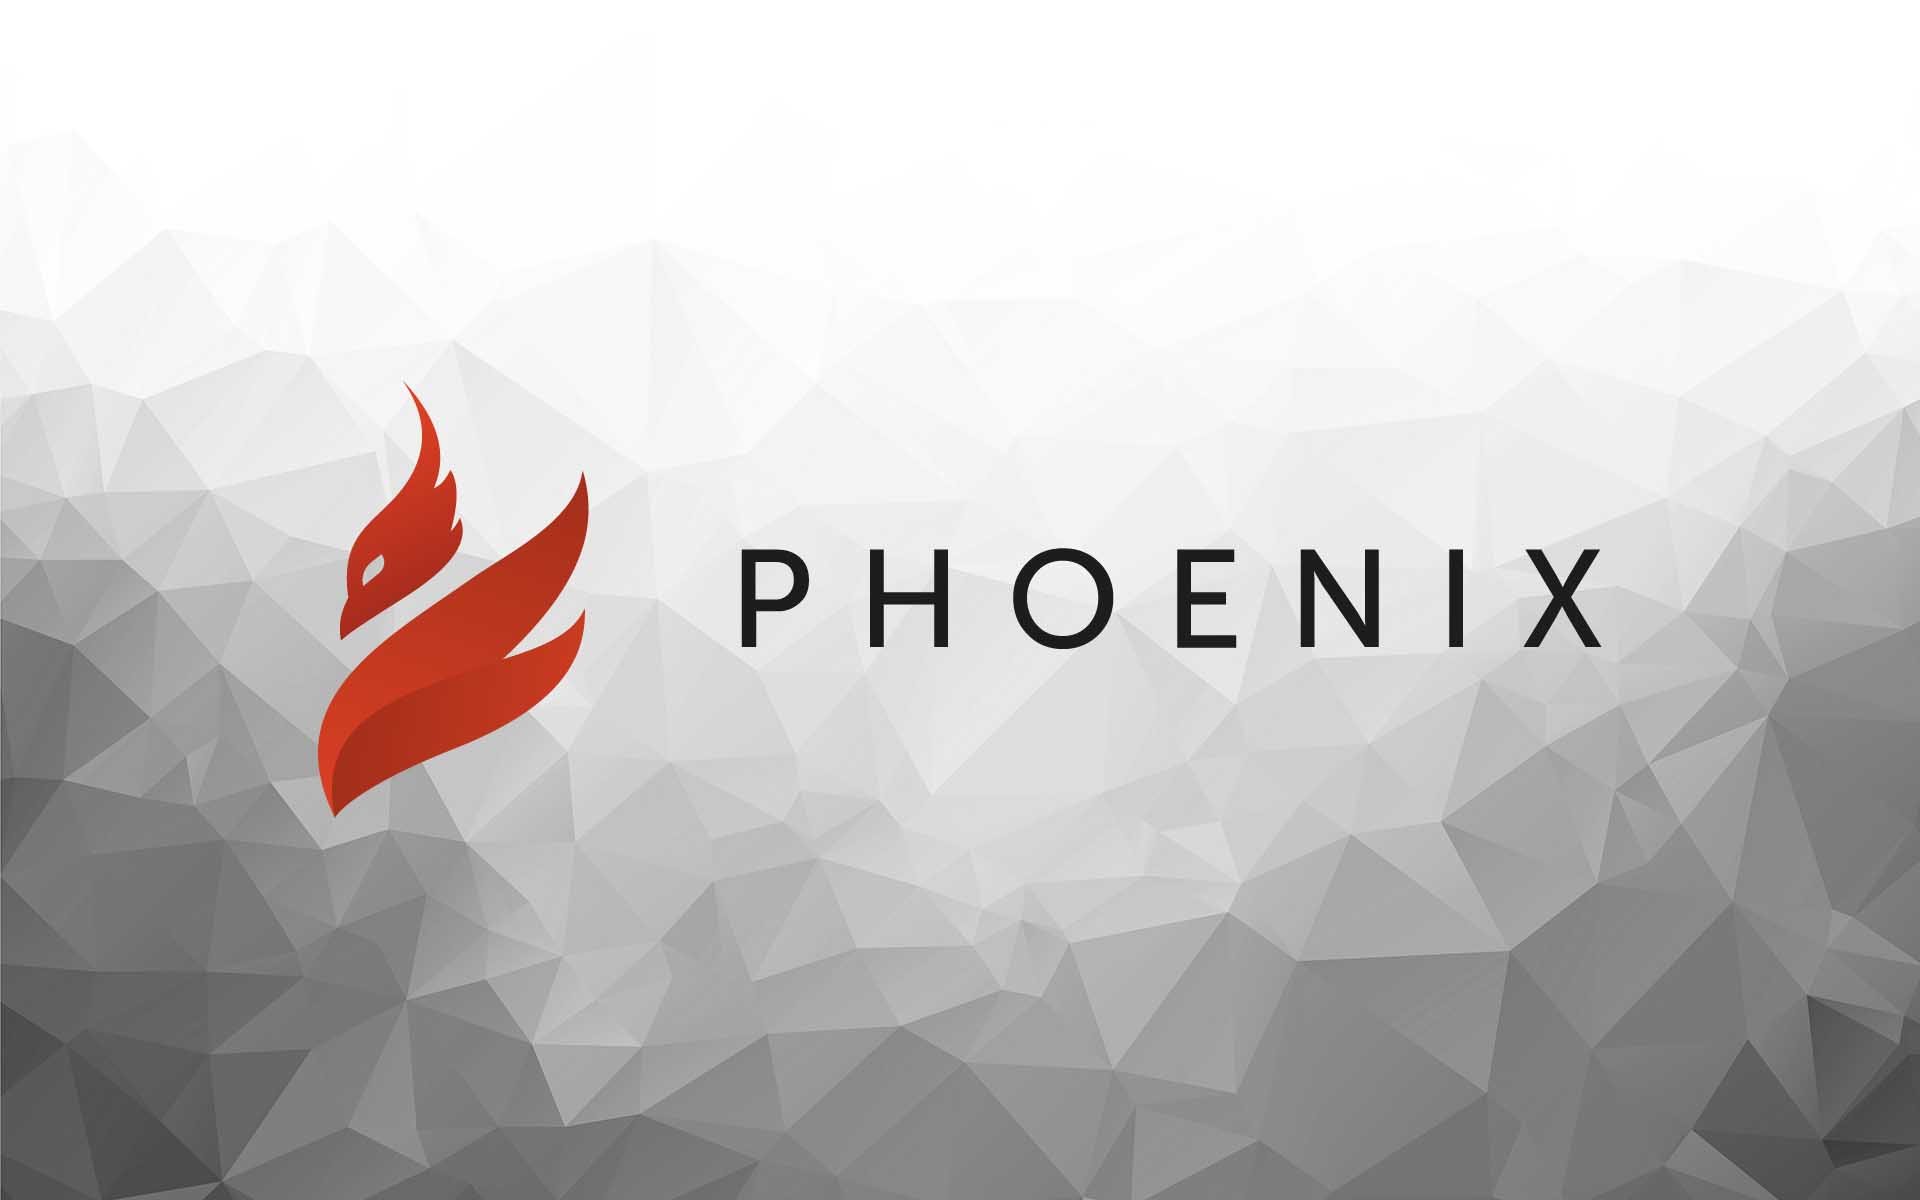 Phoenix Provides the Rebirth of Cryptocurrency Investing Through Secure Smart Contracts